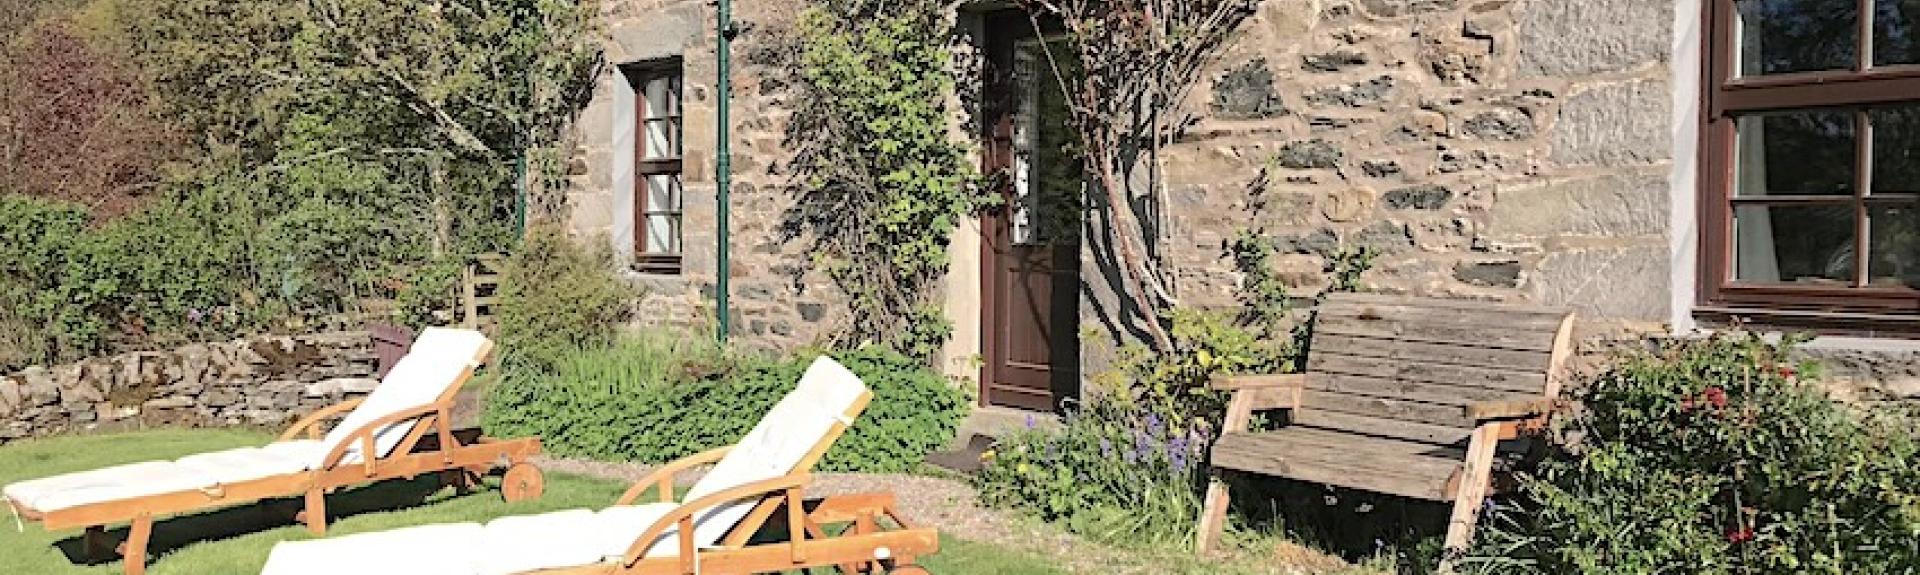 Sun loungers on a lawn in front of a stone-built holiday cottage